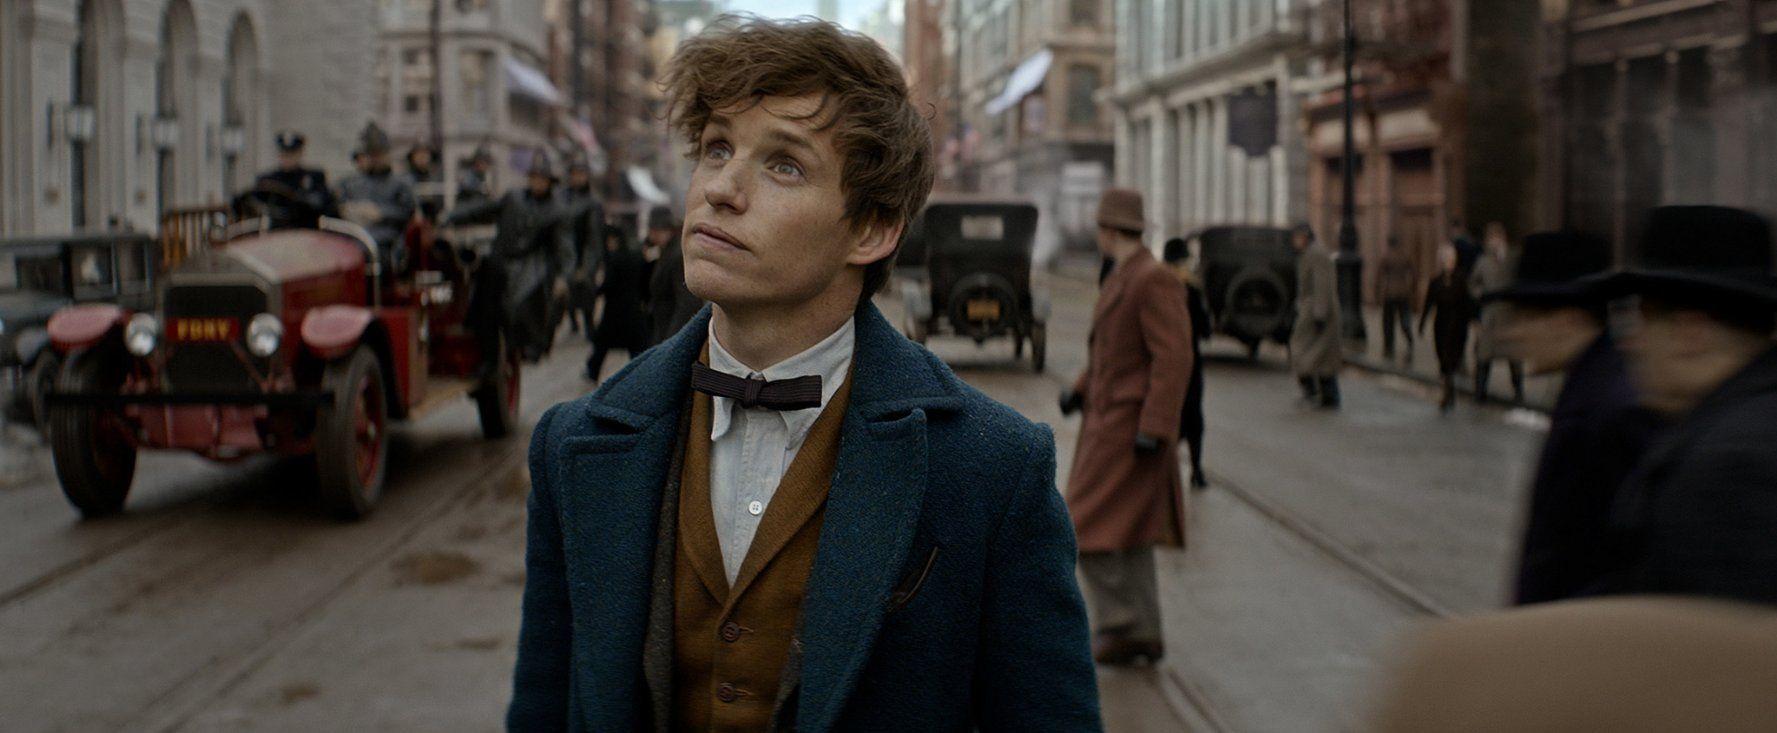 Newt Scamander reunites with an old friend in new Fantastic Beasts